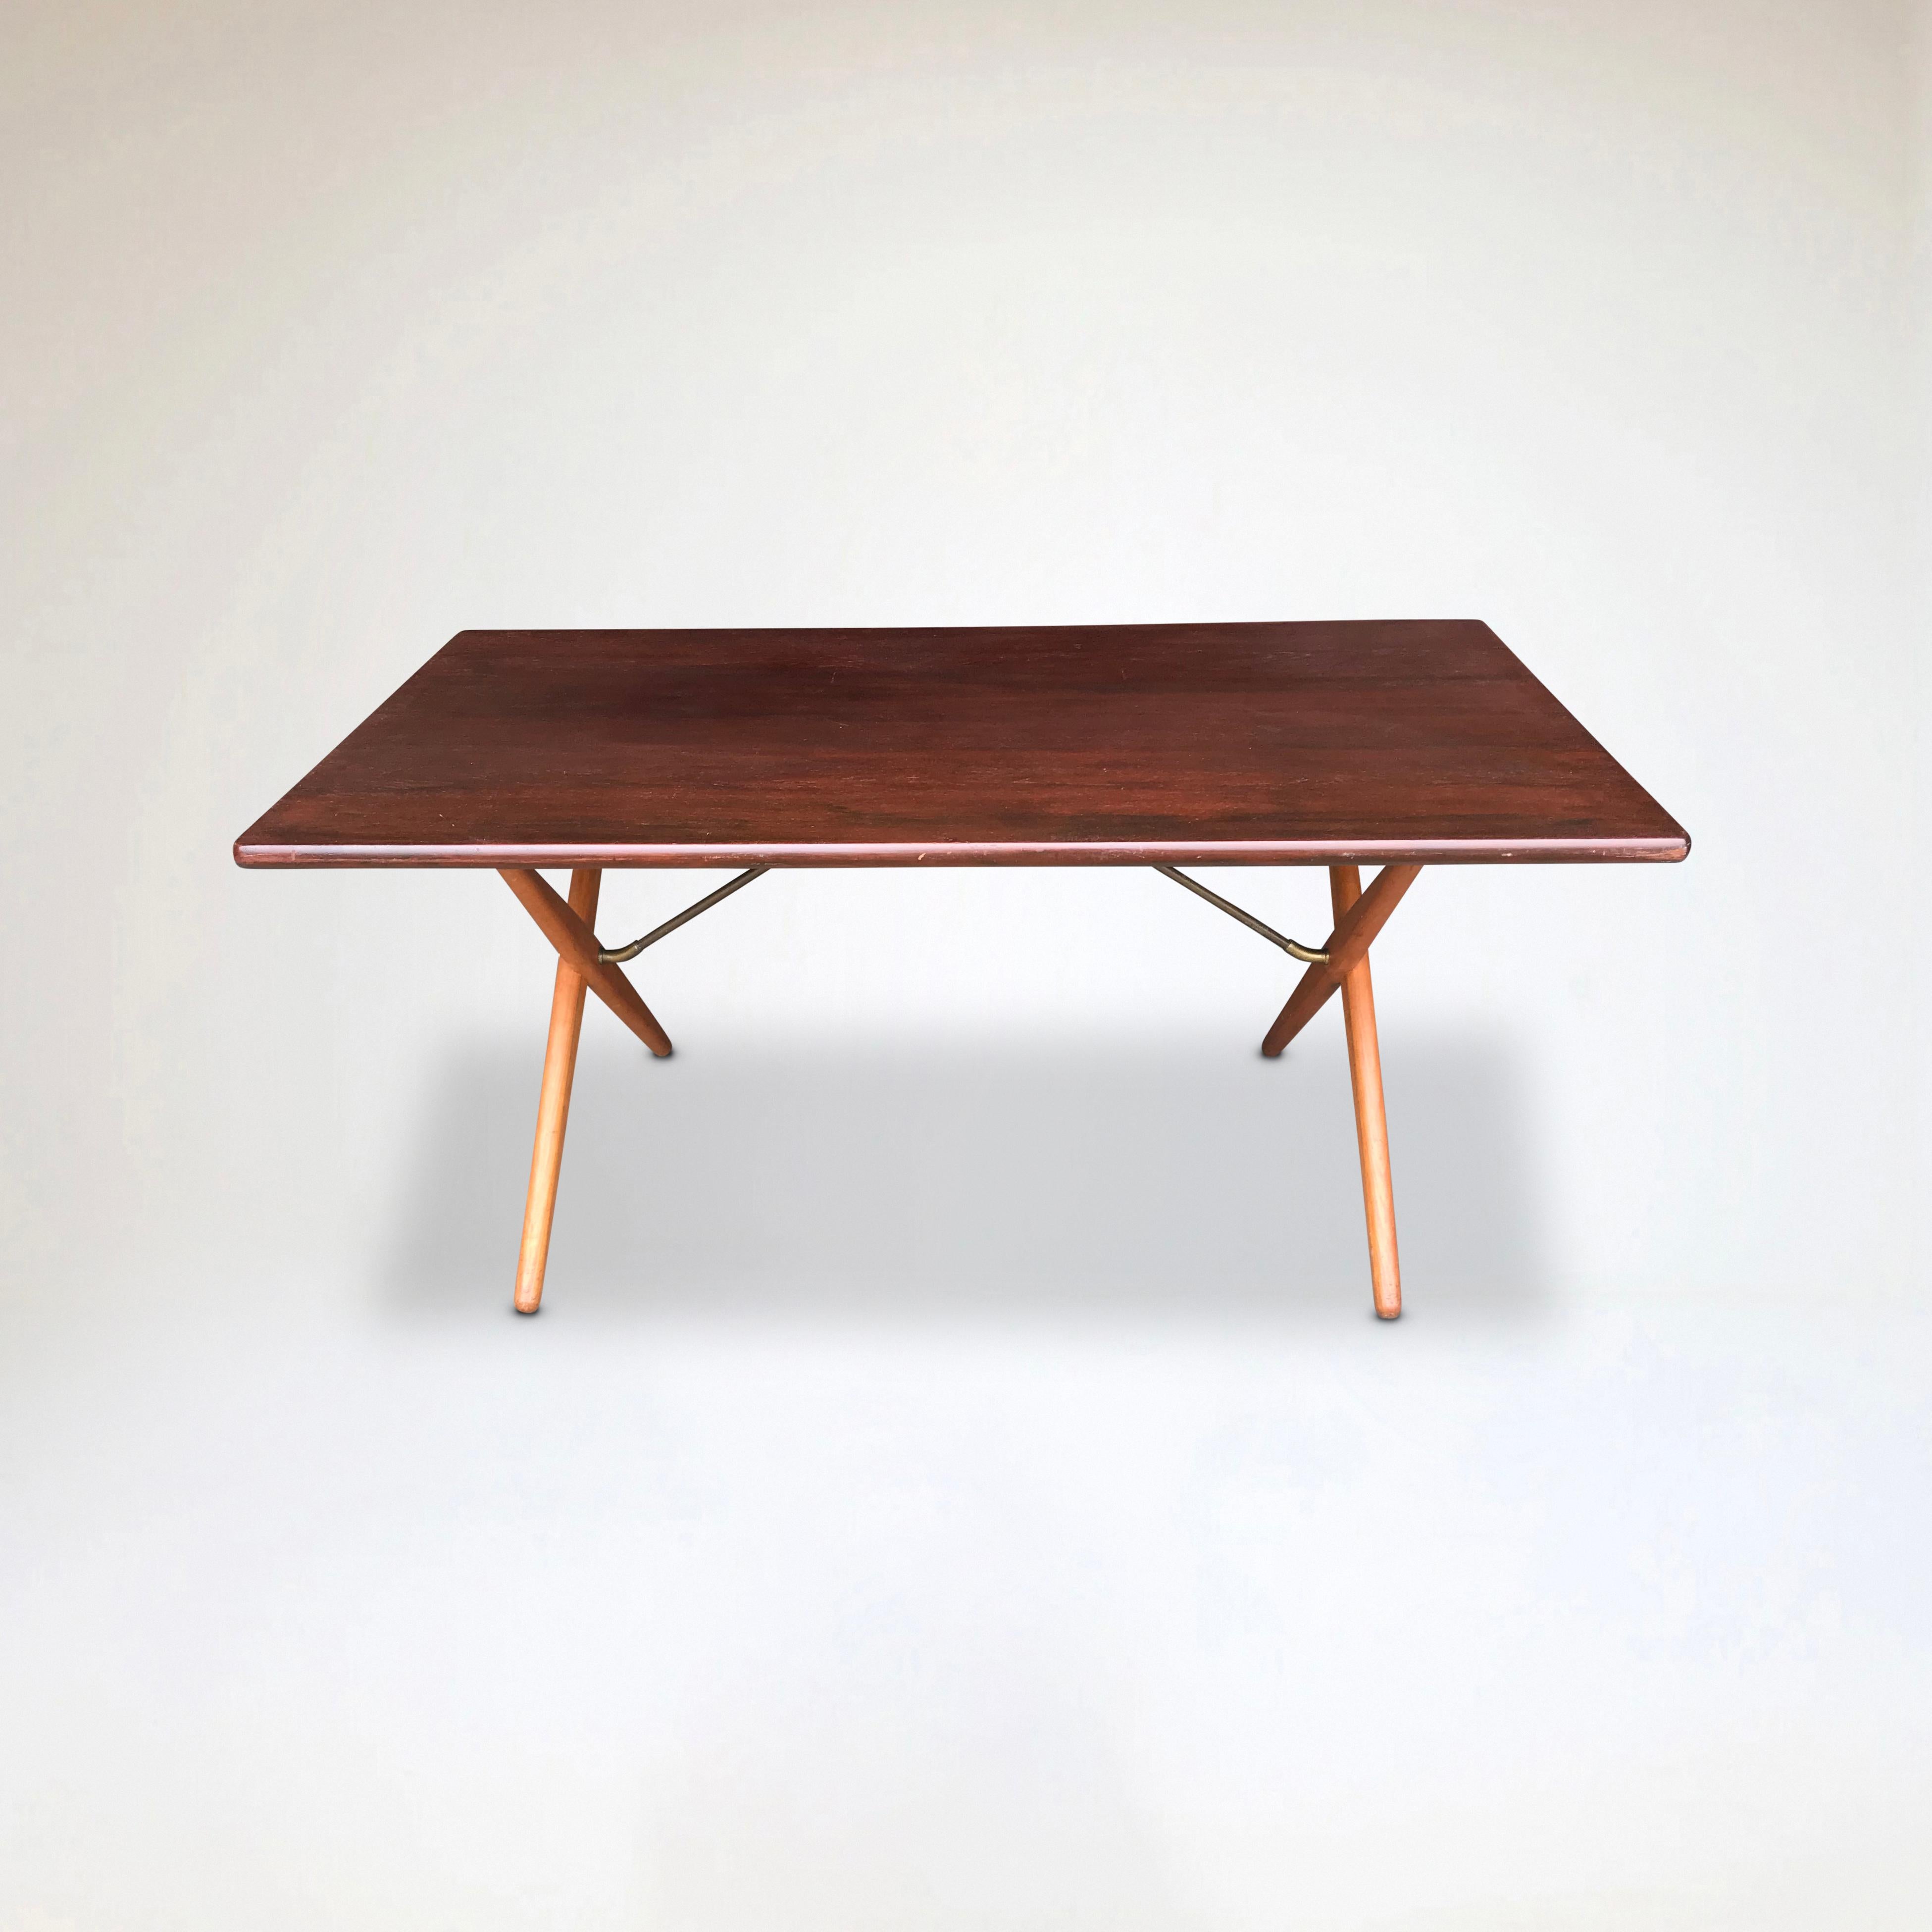 Mid-20th Century AT-303 Sawbuck oak dining table by Hans Wegner for Andreas Tuck 1950s For Sale